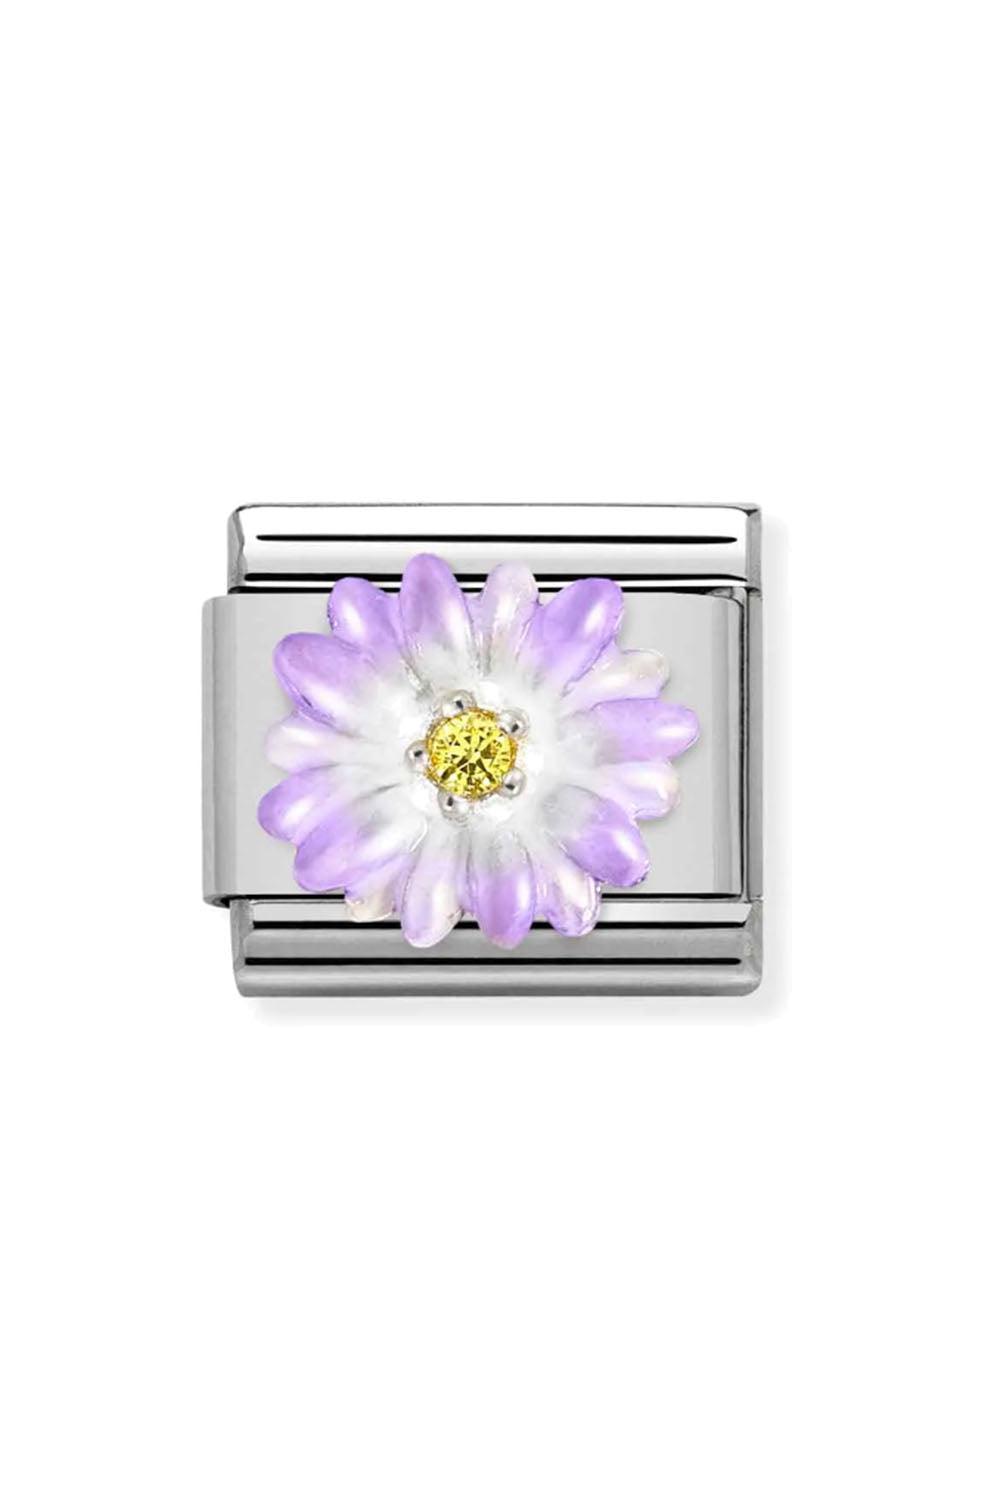 Symbols 925 Sterling Silver with Enamel and CZ purple flower